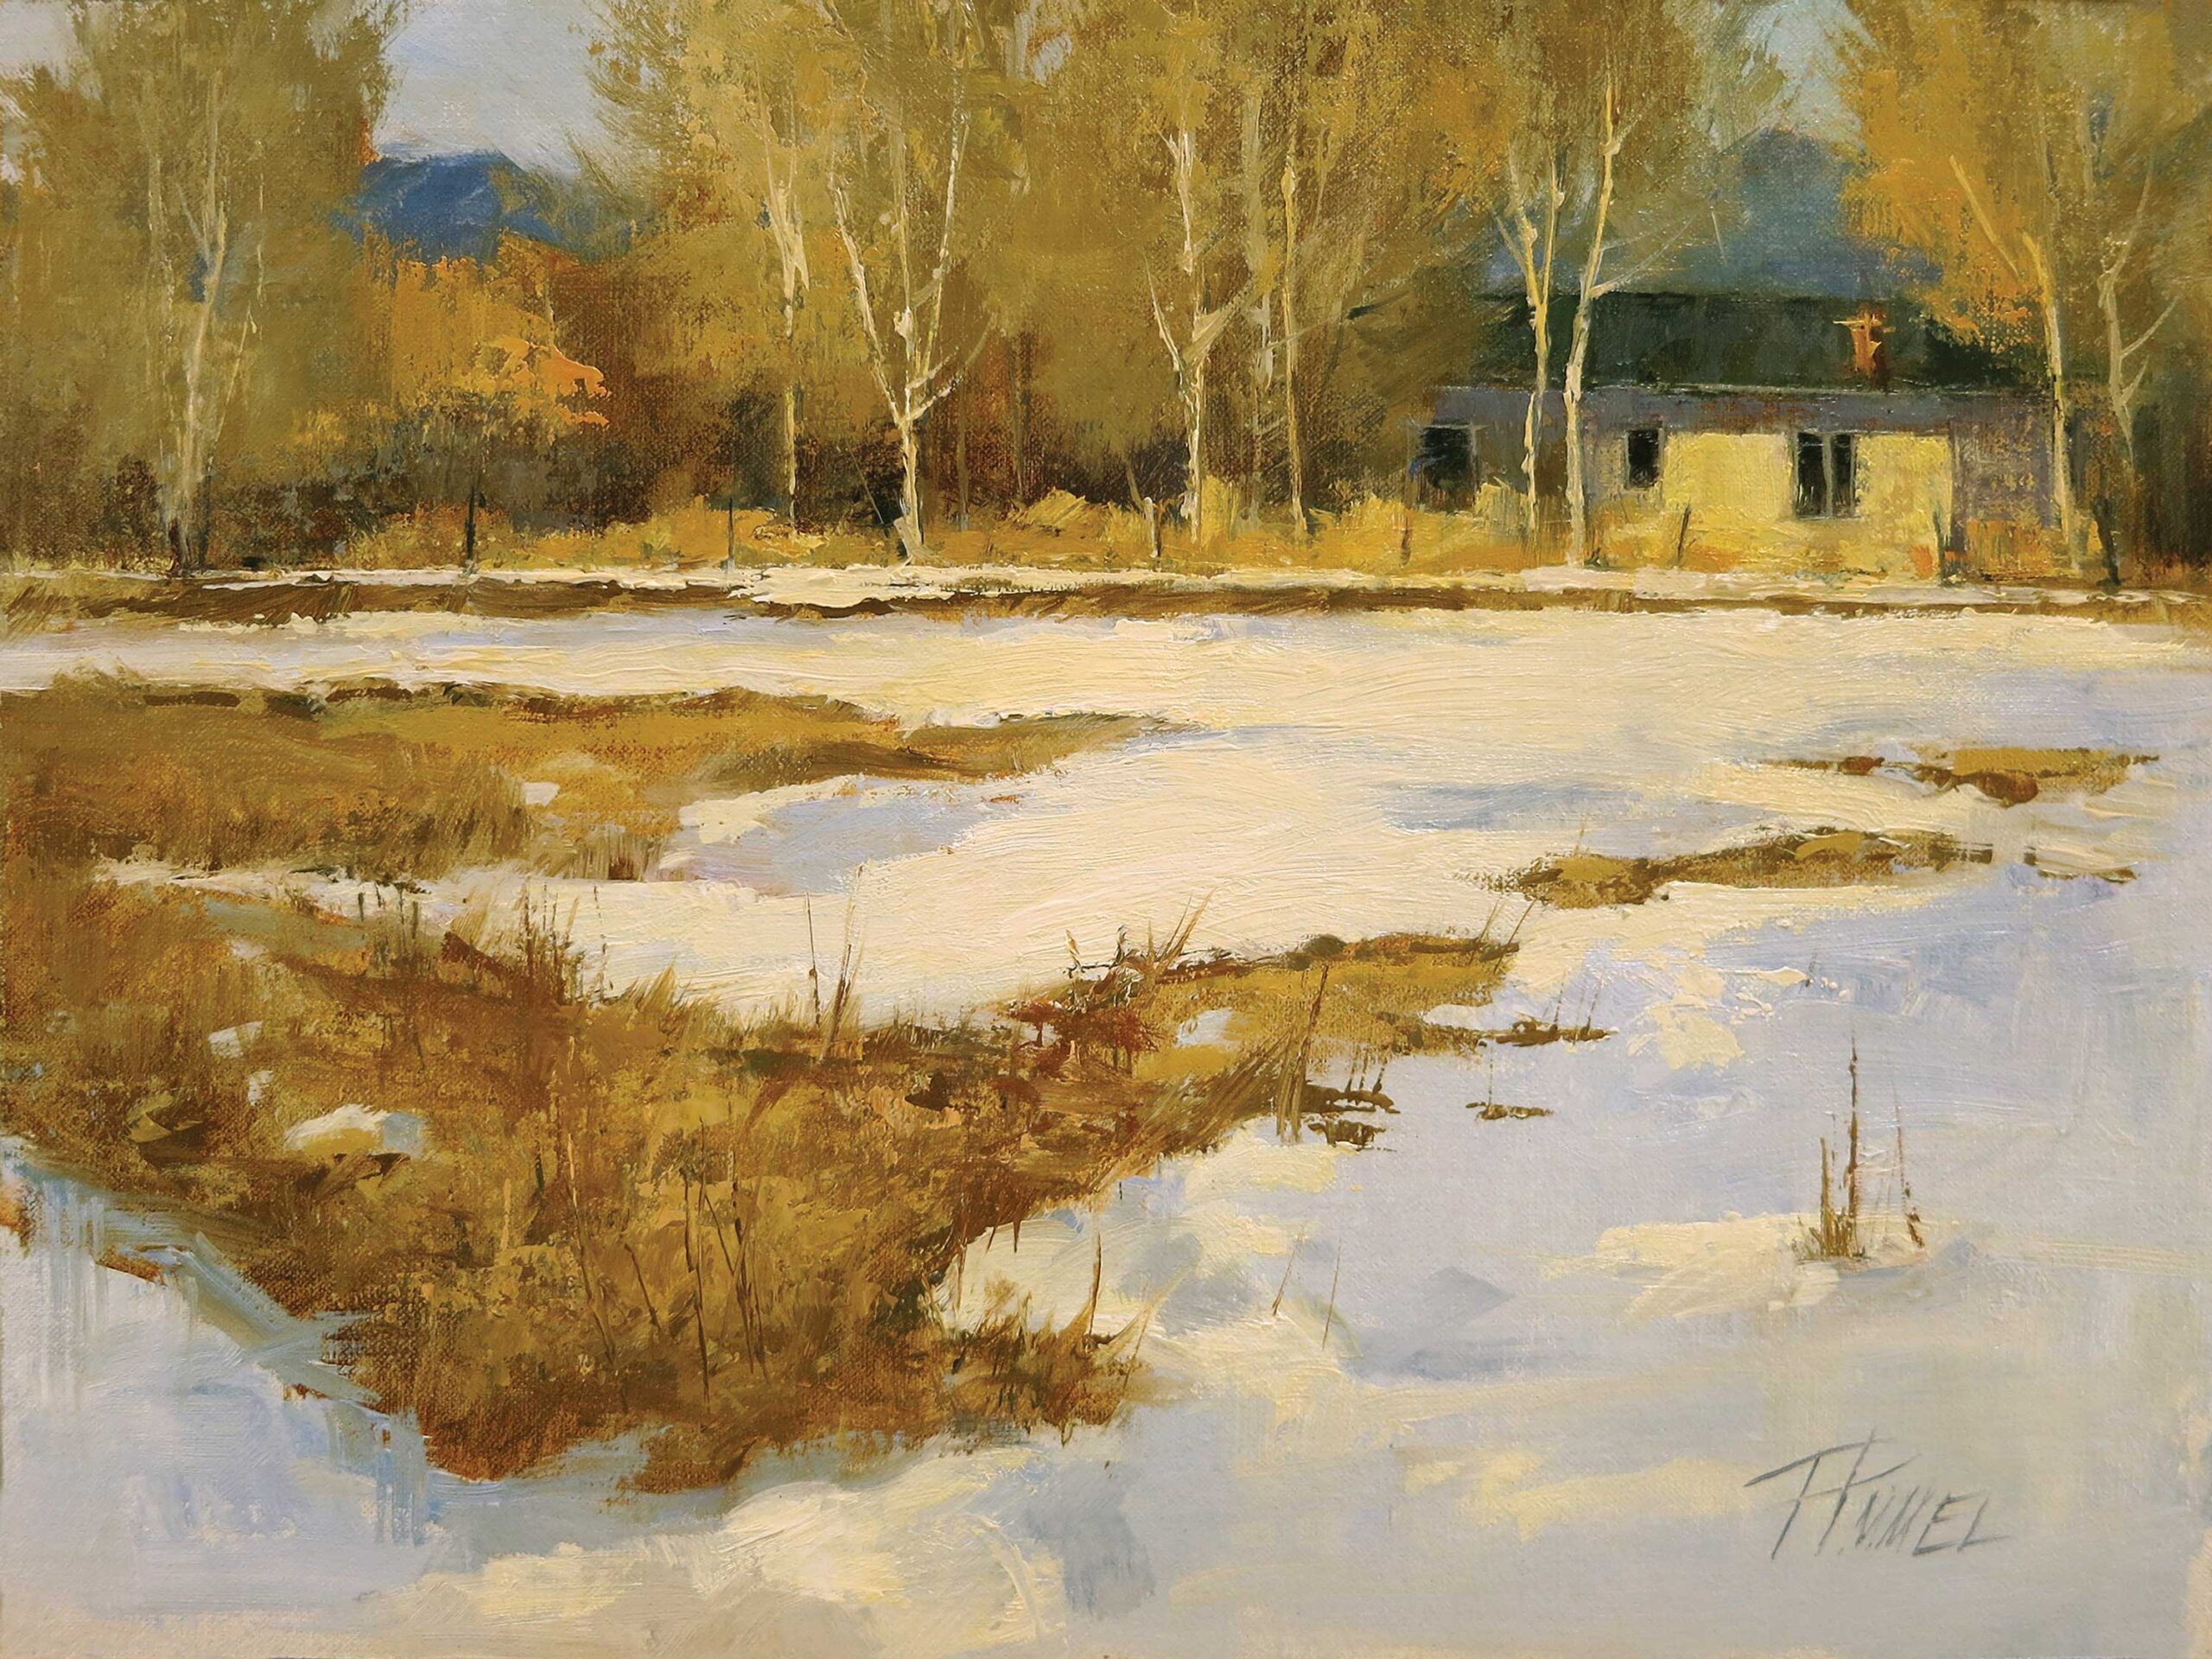 Peggy Immel, "Winter Field," 2016, oil, 9 x 12 in., private collection